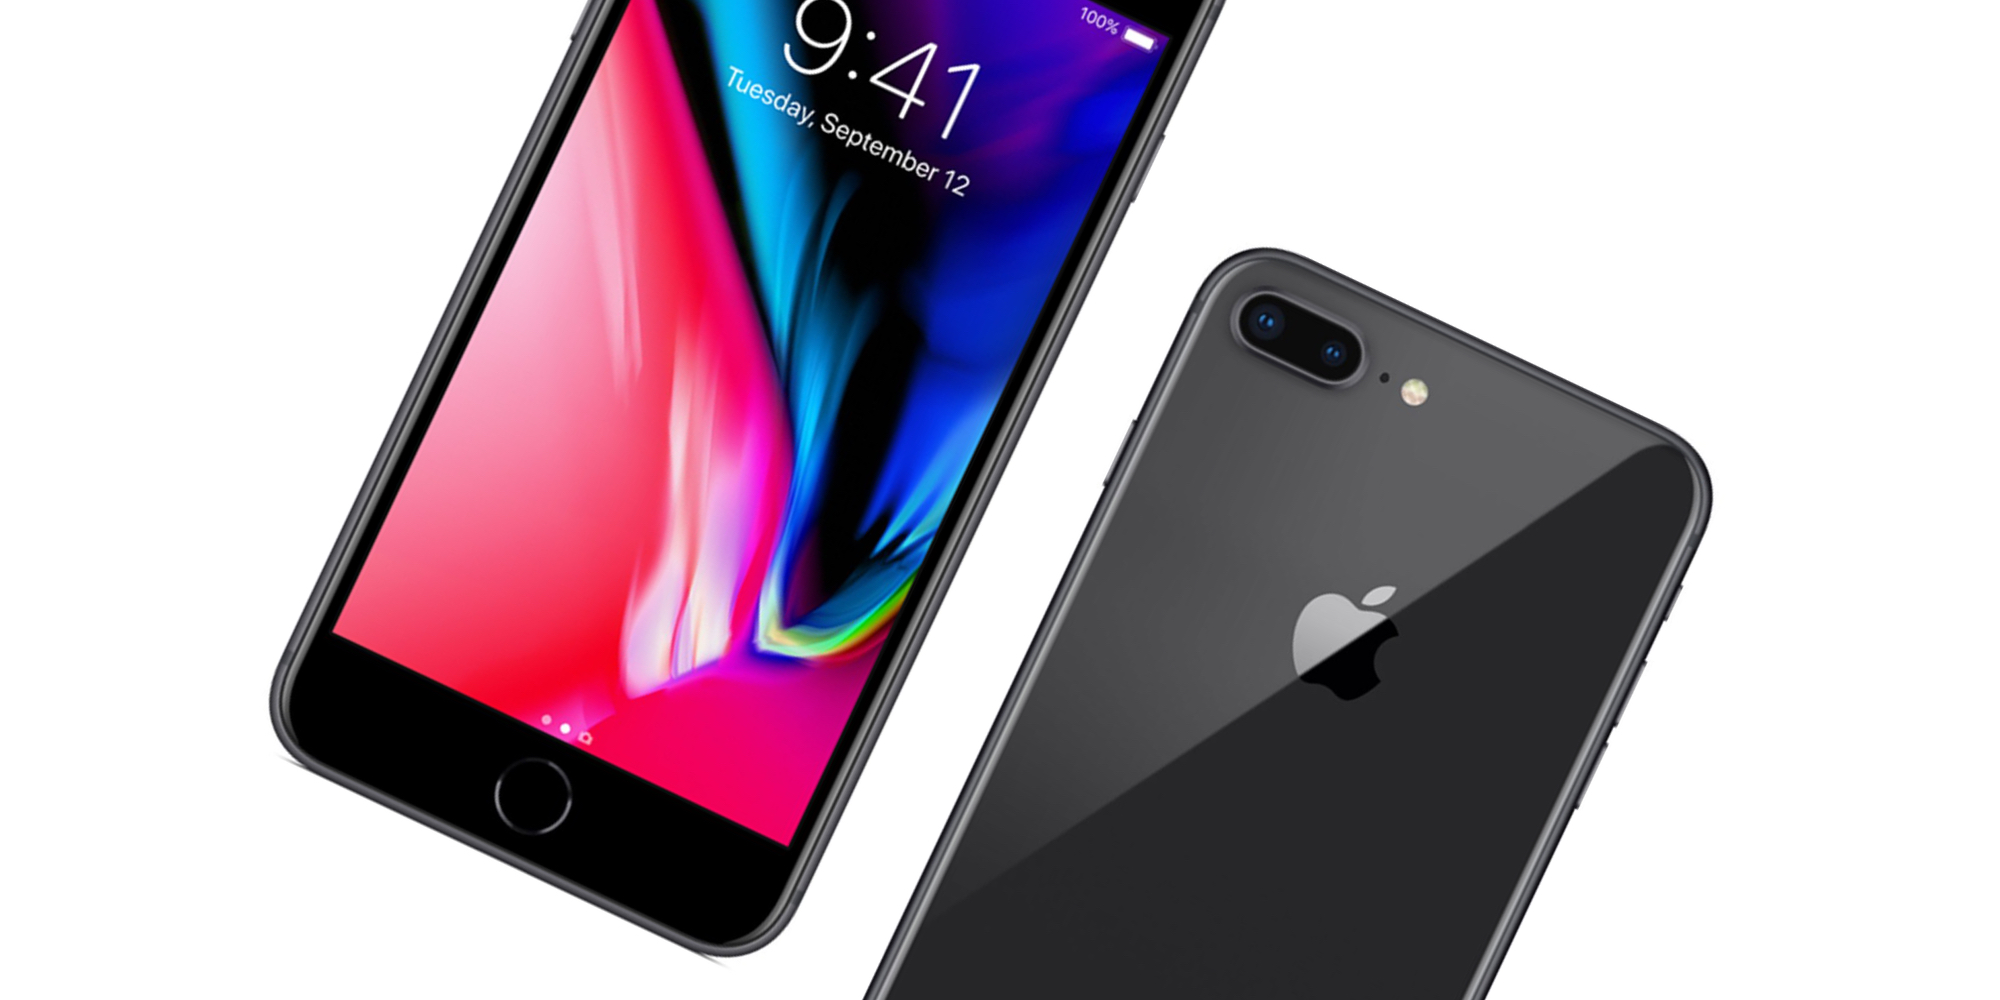 Bigger iPhone 9 Plus could accompany Apple's iPhone 9, iOS 14 code